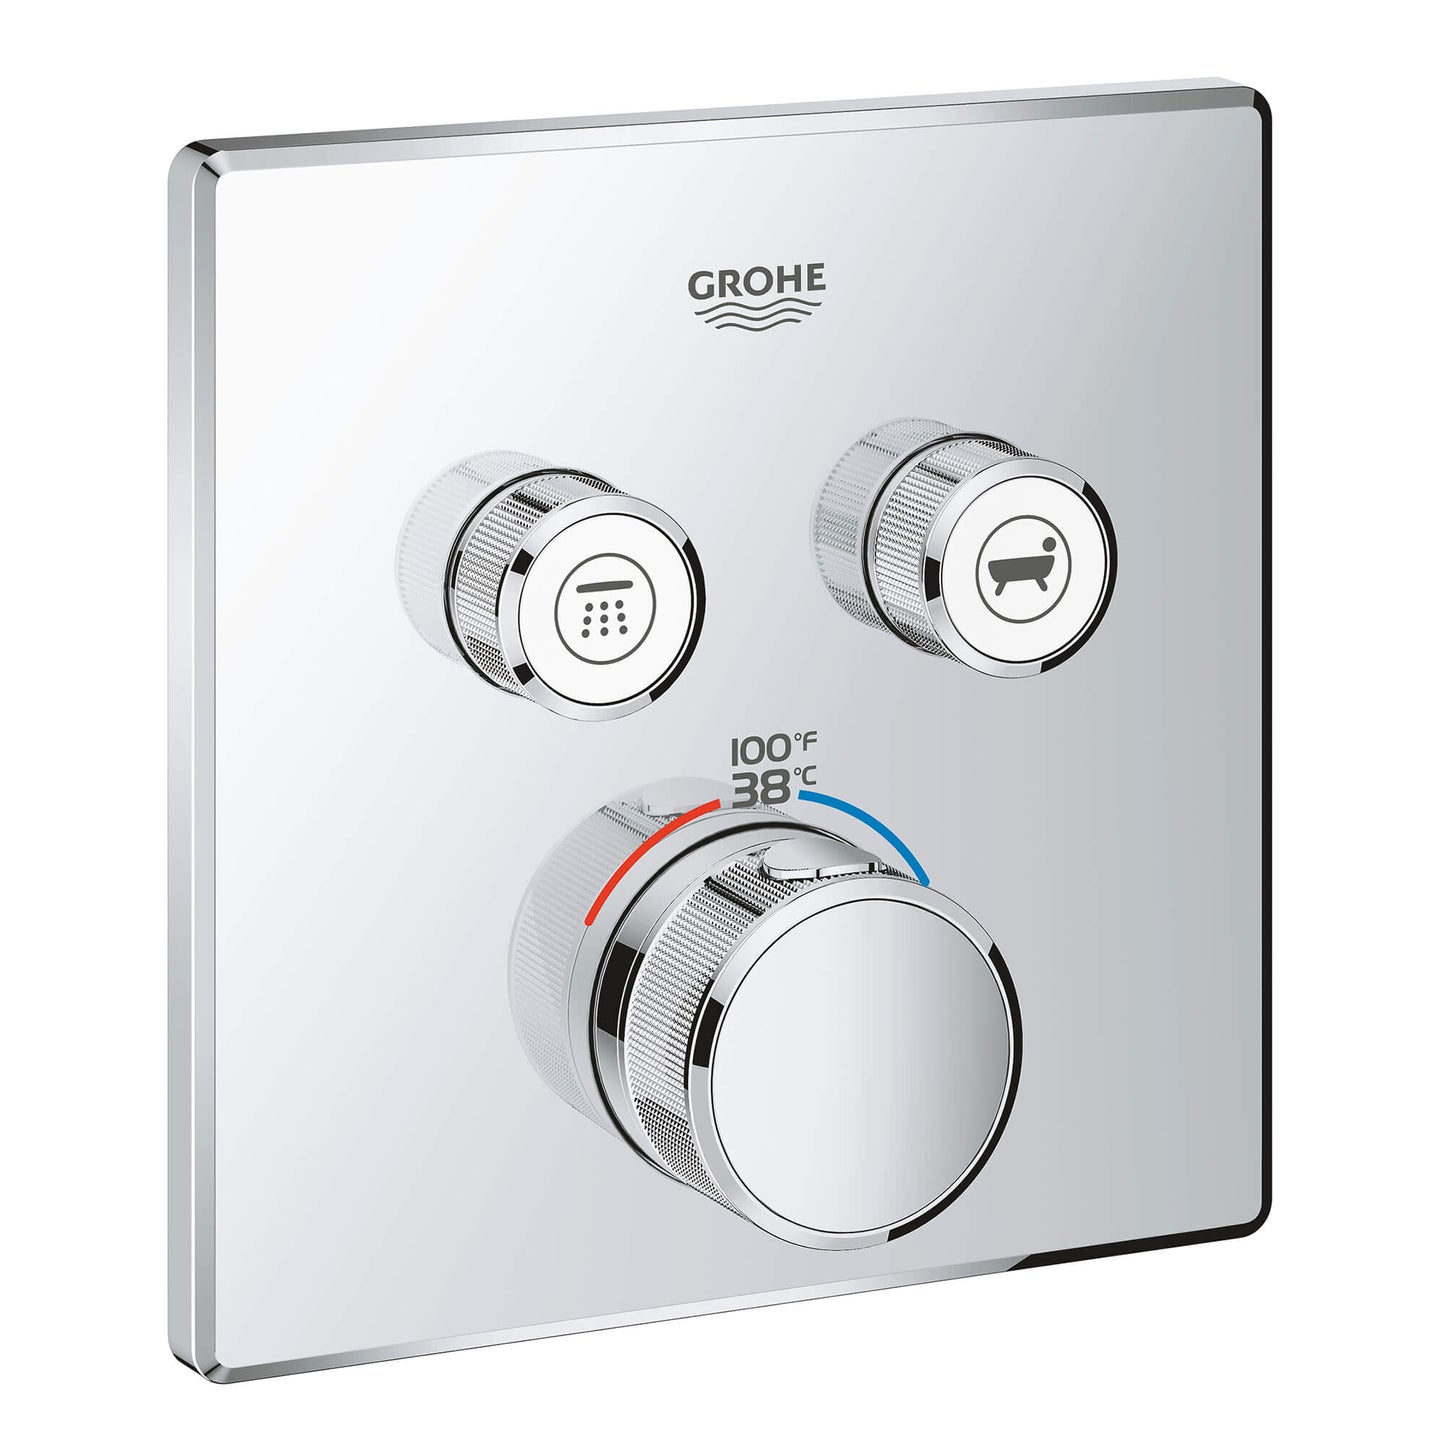 GROHE 29141000 Grohtherm Chrome Dual Function Thermostatic Valve Trim